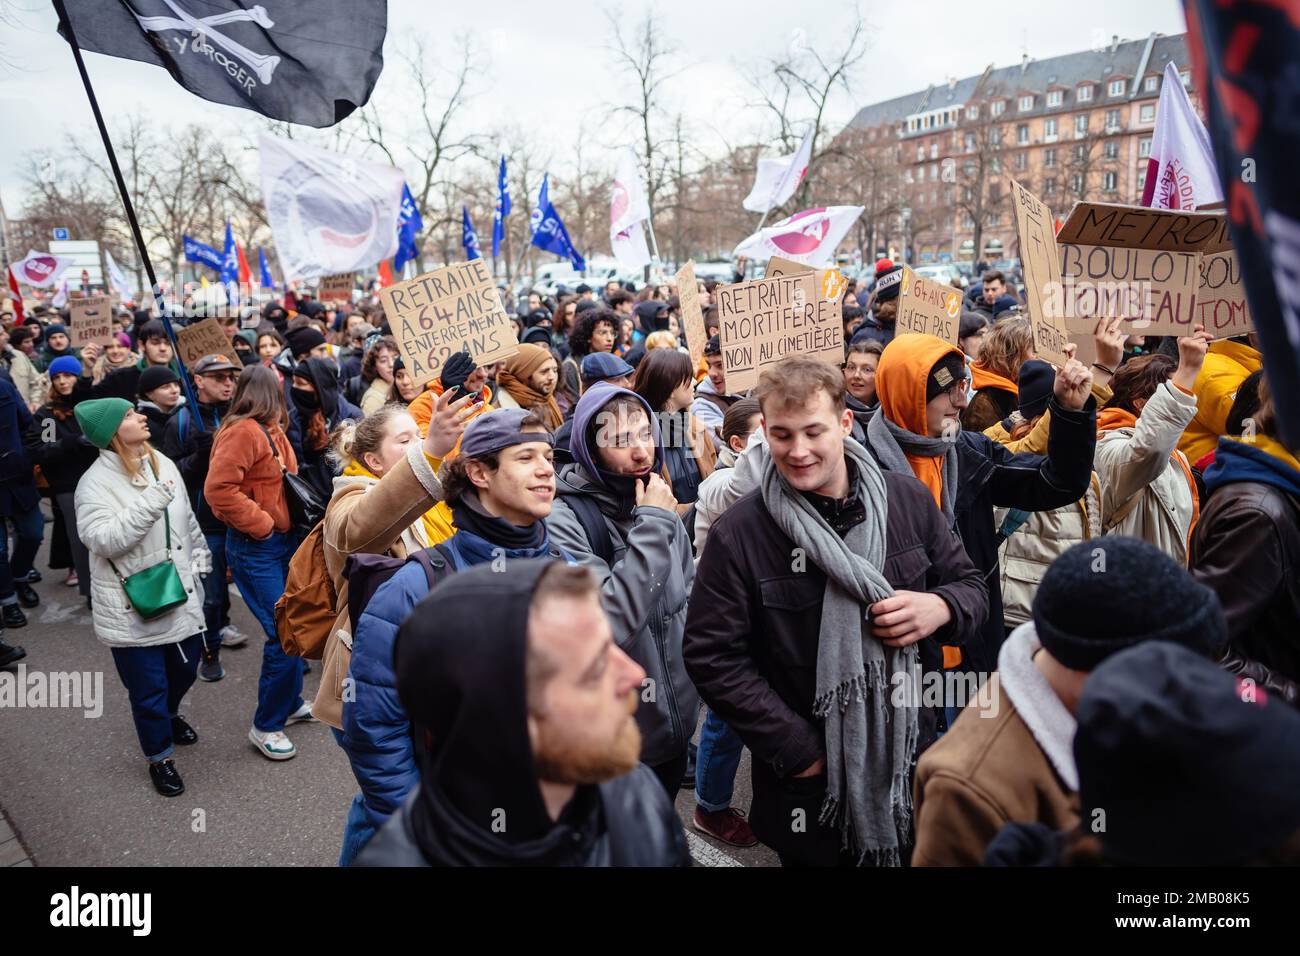 Strasbourg, France - Jan 19, 2023: Elevated view of large crowd at protest against the French government's planned pension reform to push the retirement age from 62 to 64 unions have called for mass social action Stock Photo